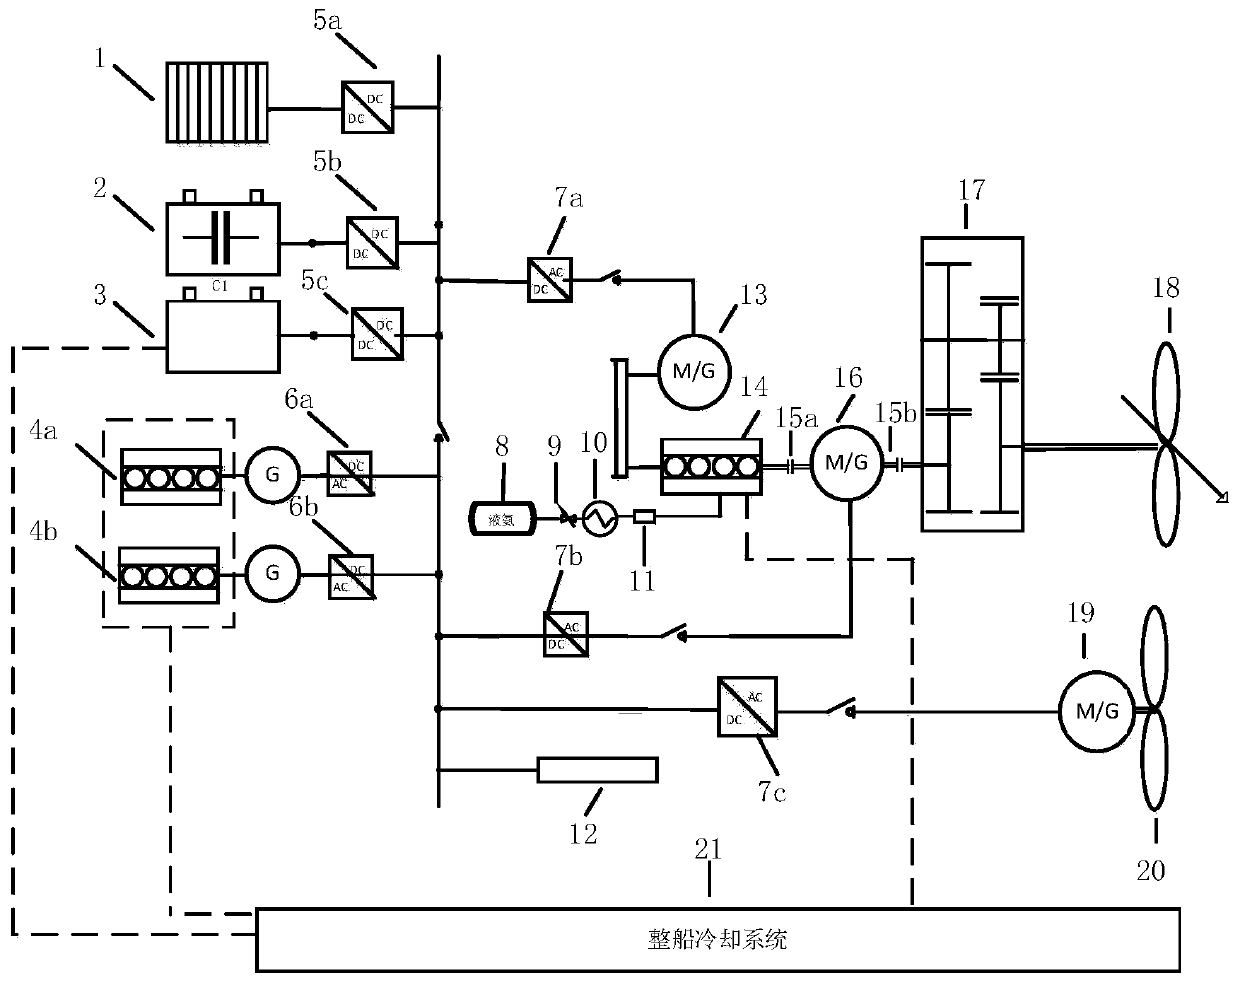 Ship ammonia-electricity hybrid power system with heat storage-cooling battery heat management system